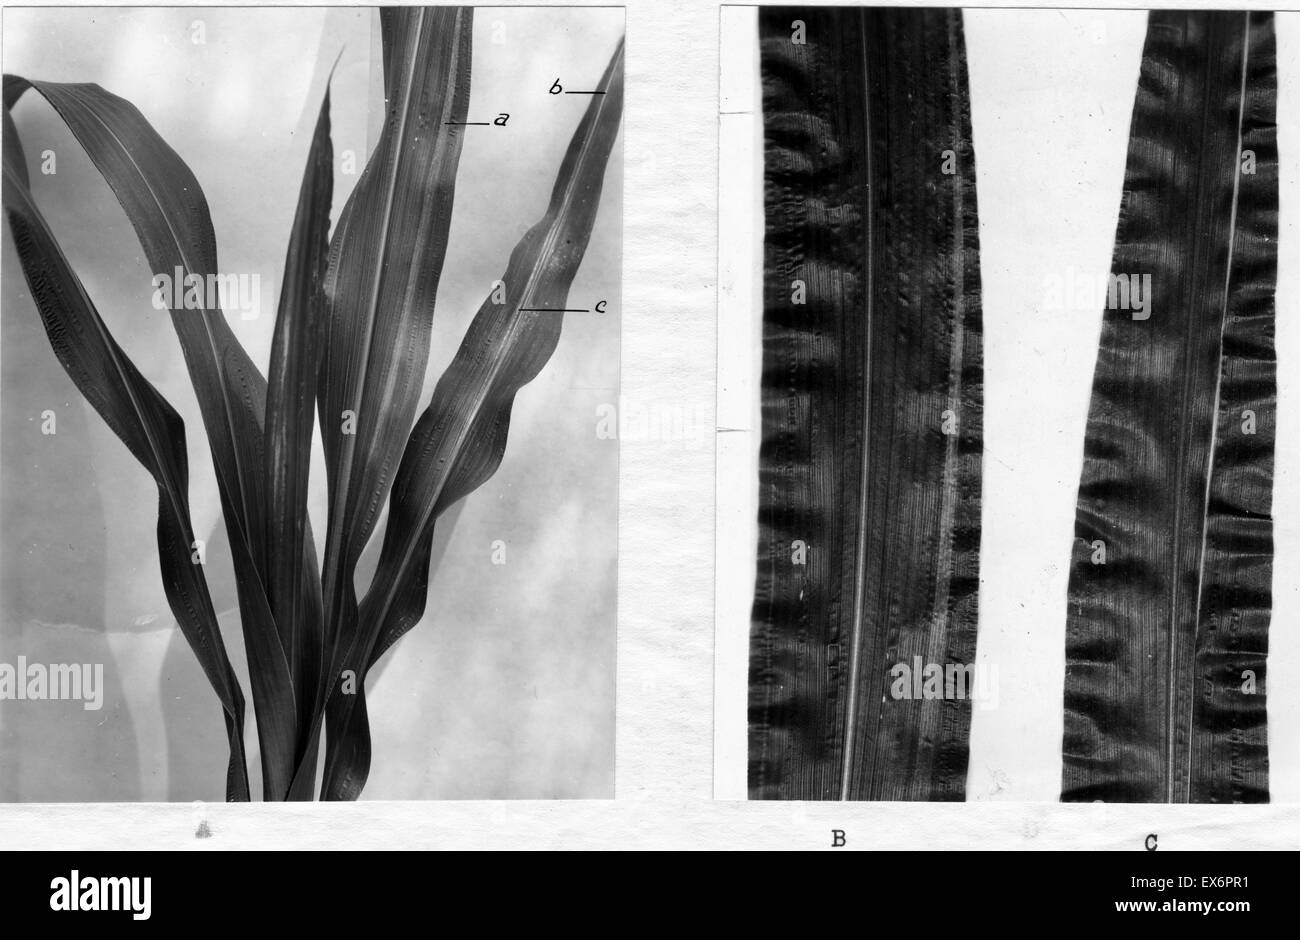 Corn stalk specimen researched in 1942 by Barbara McClintock (1902-1992)the American geneticist who won the 1983 Nobel Prize in Physiology or Medicine for her discovery of genetic transposition Stock Photo